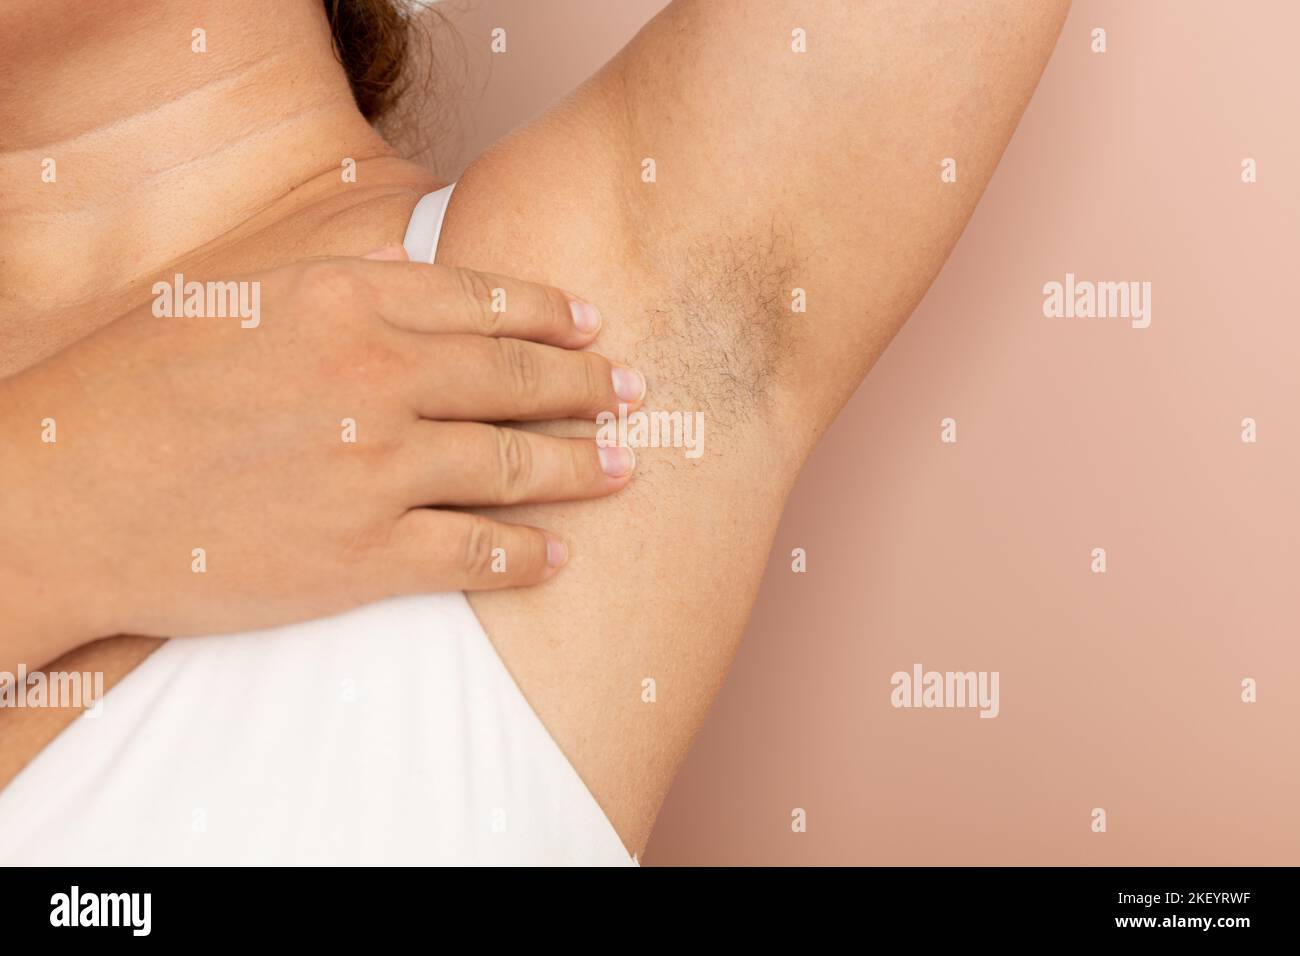 Woman touch hairy underarms with hand closeup, free copy space, beige background. Raised arm with armpit hair. Female beauty trend, freedom, feminism Stock Photo